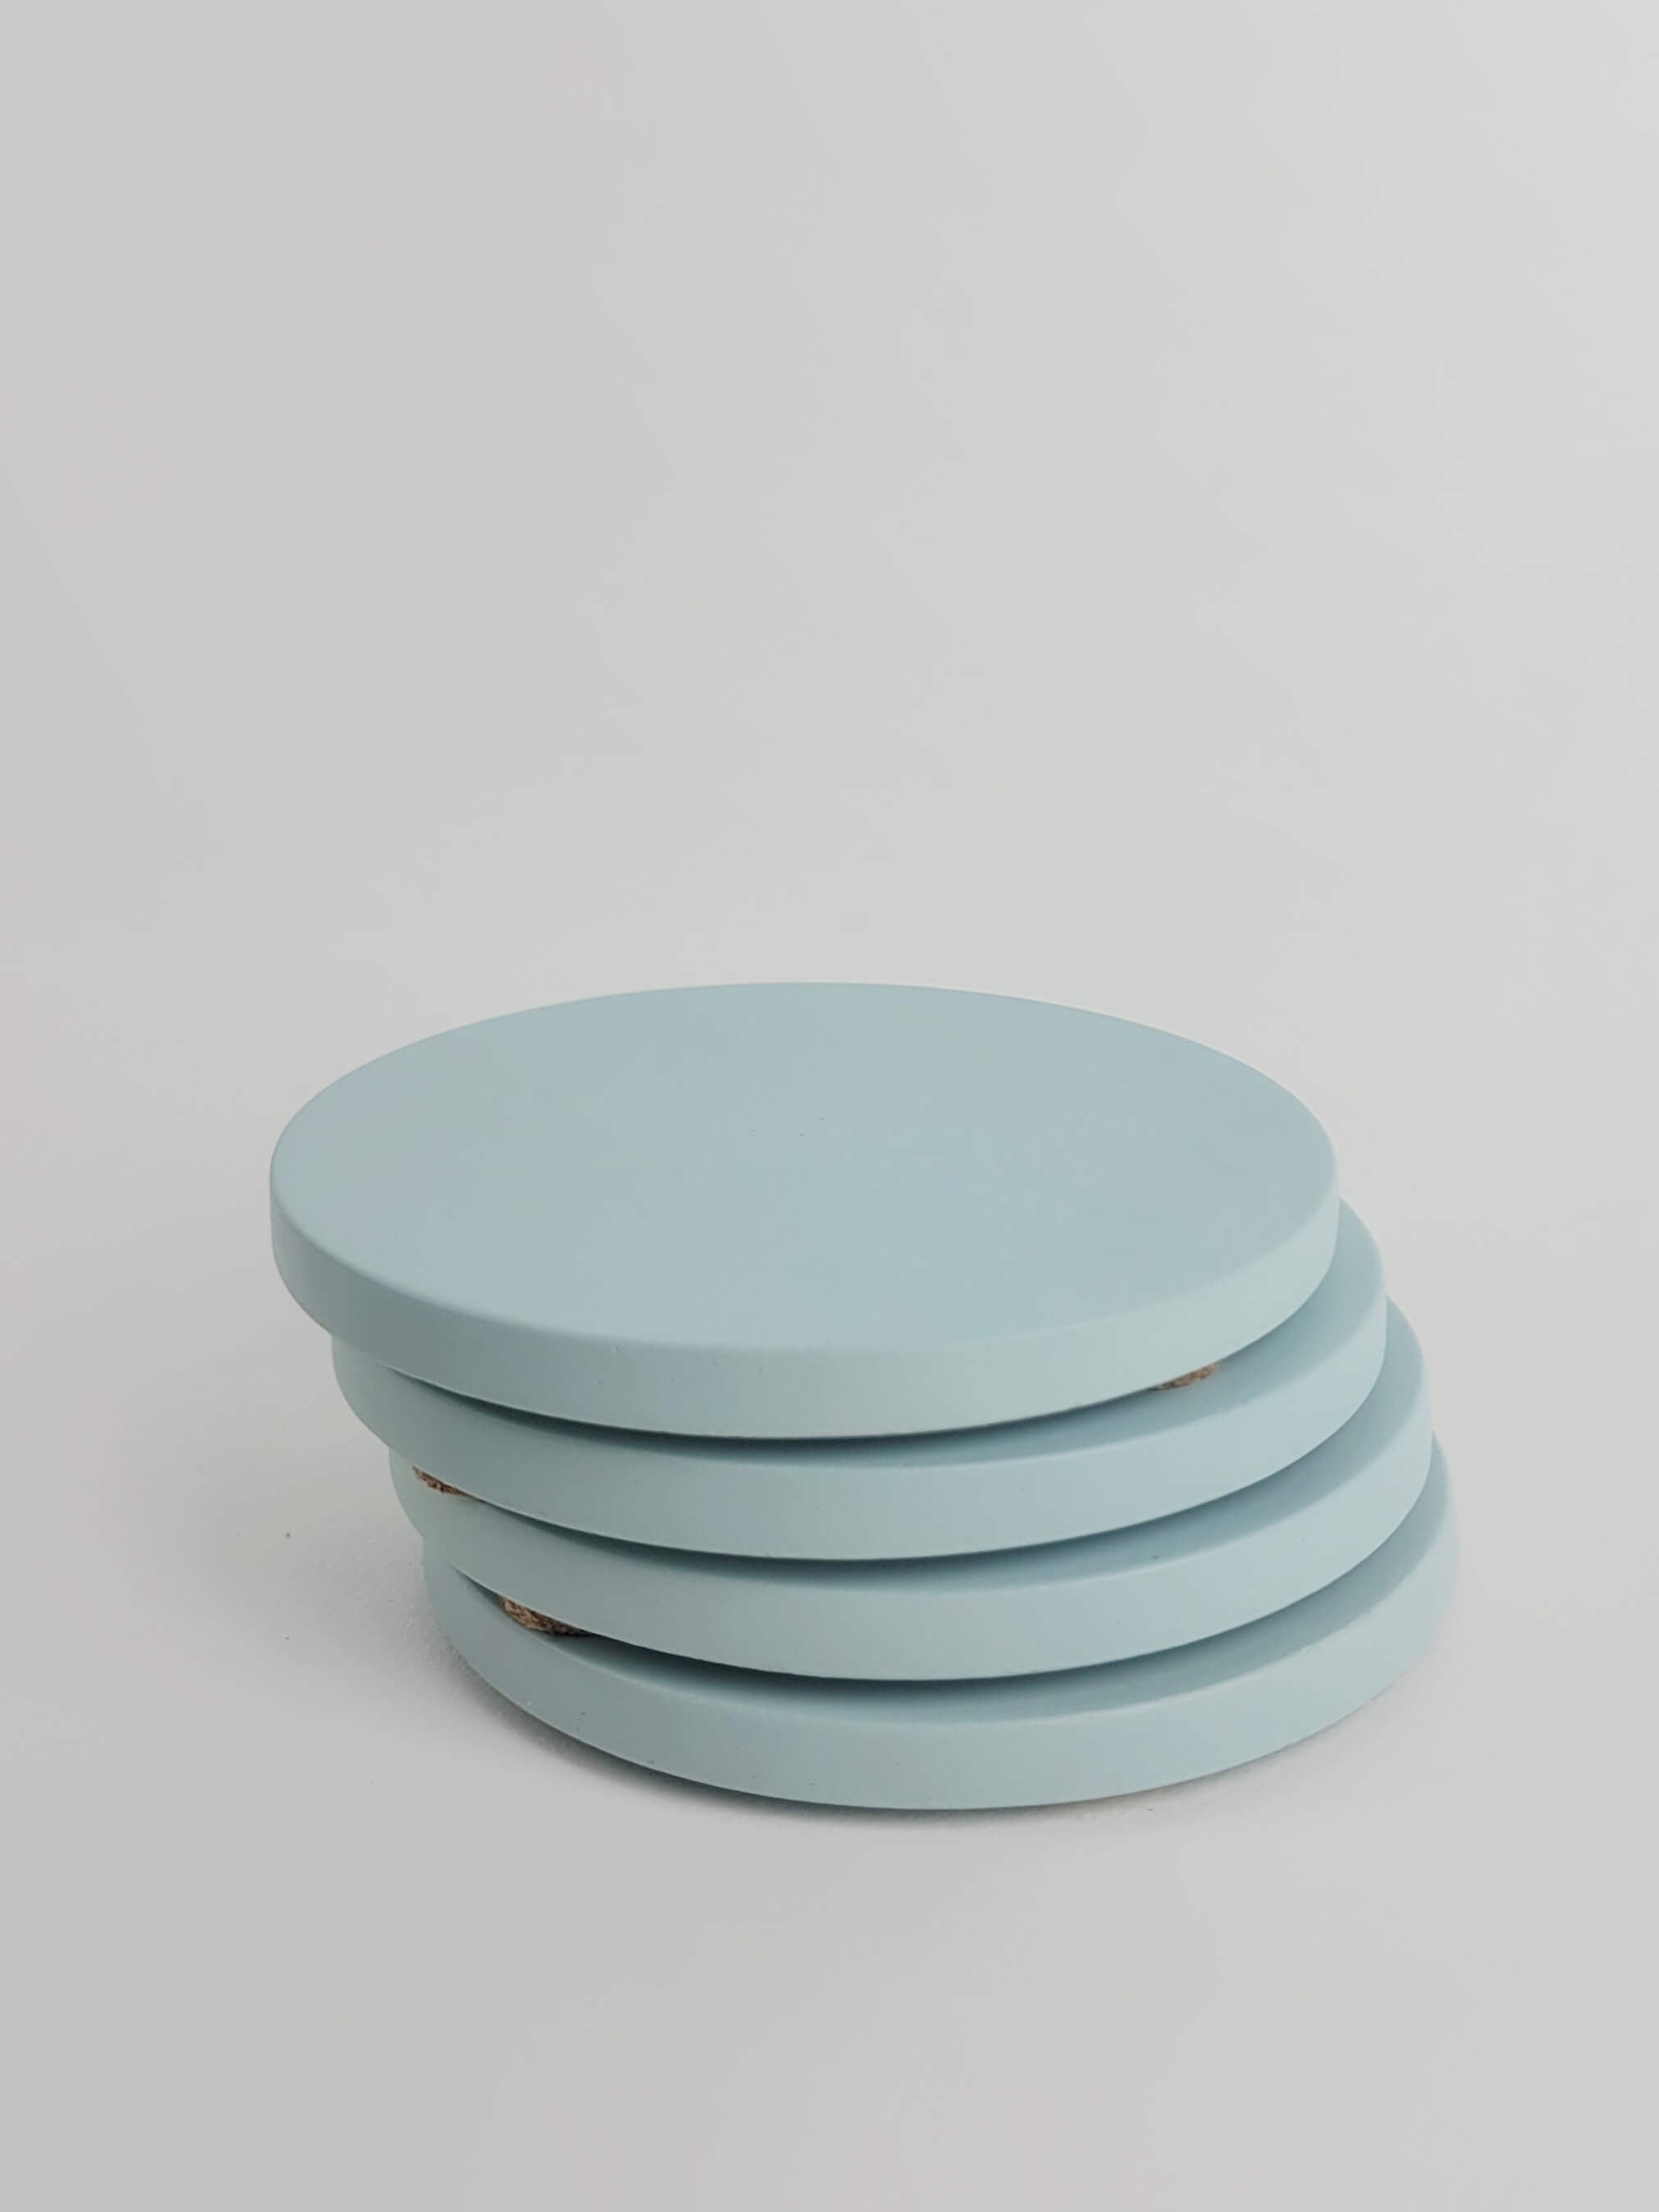 Stack of 4 pastel turquoise concrete coasters, elegantly arranged in a vertical column.